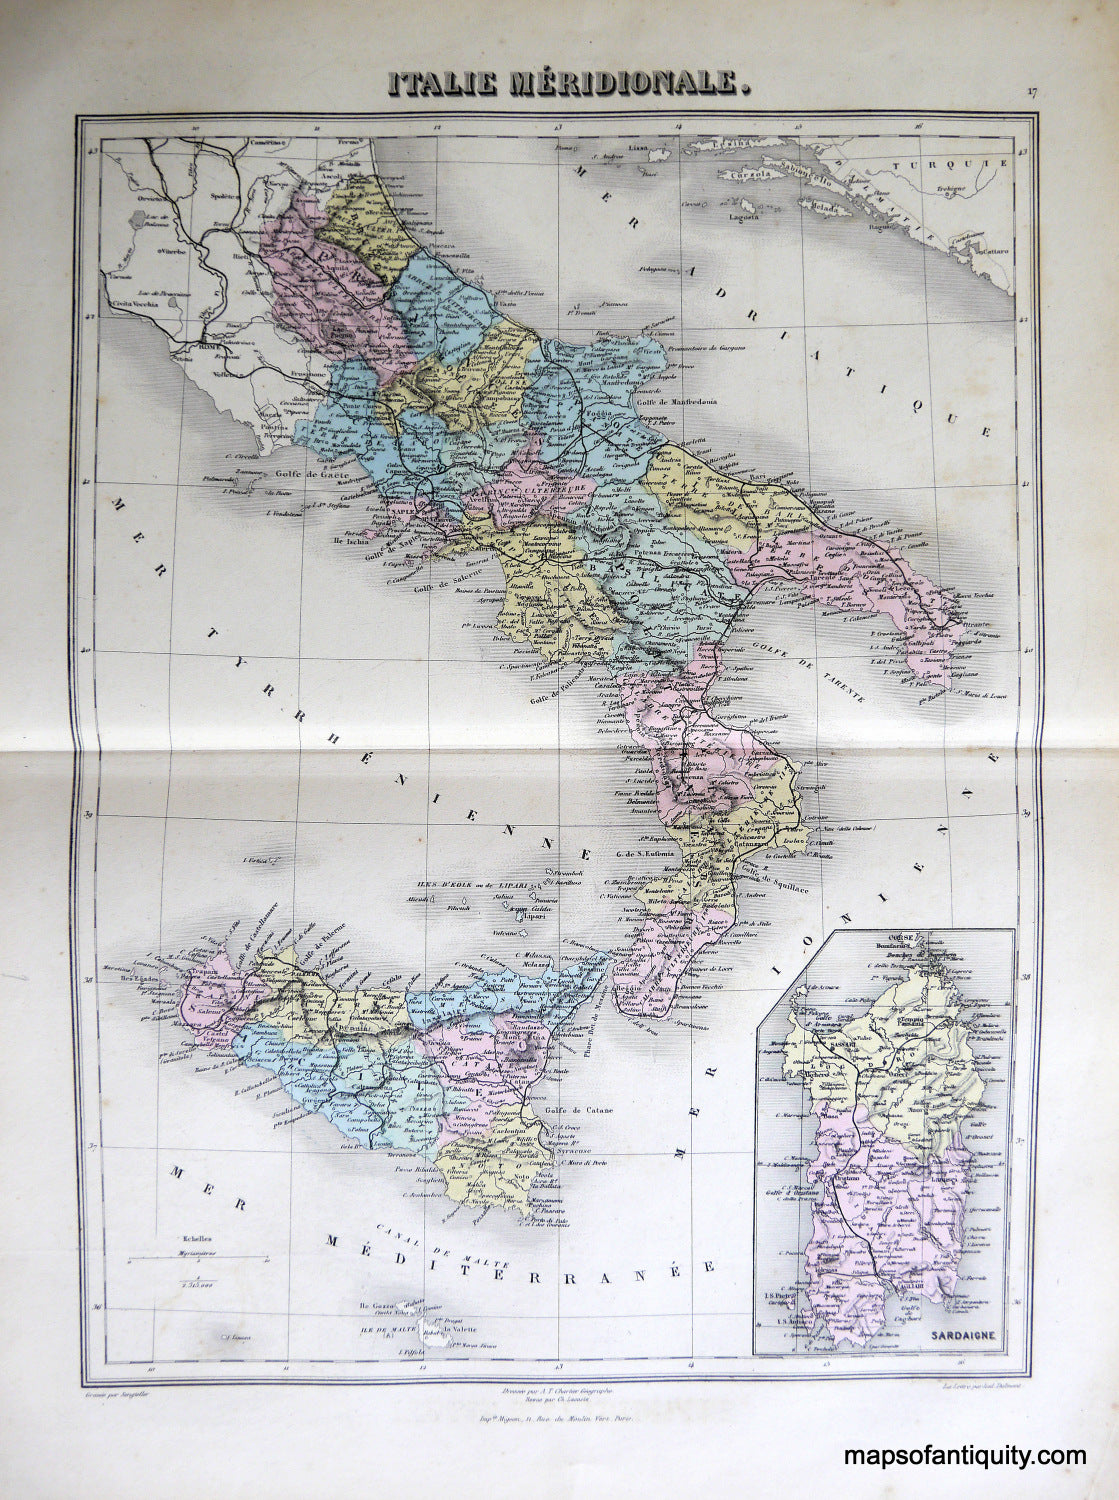 Antique-Hand-Colored-Map-1883-Migeon-Italie-Meridionale.-Italy